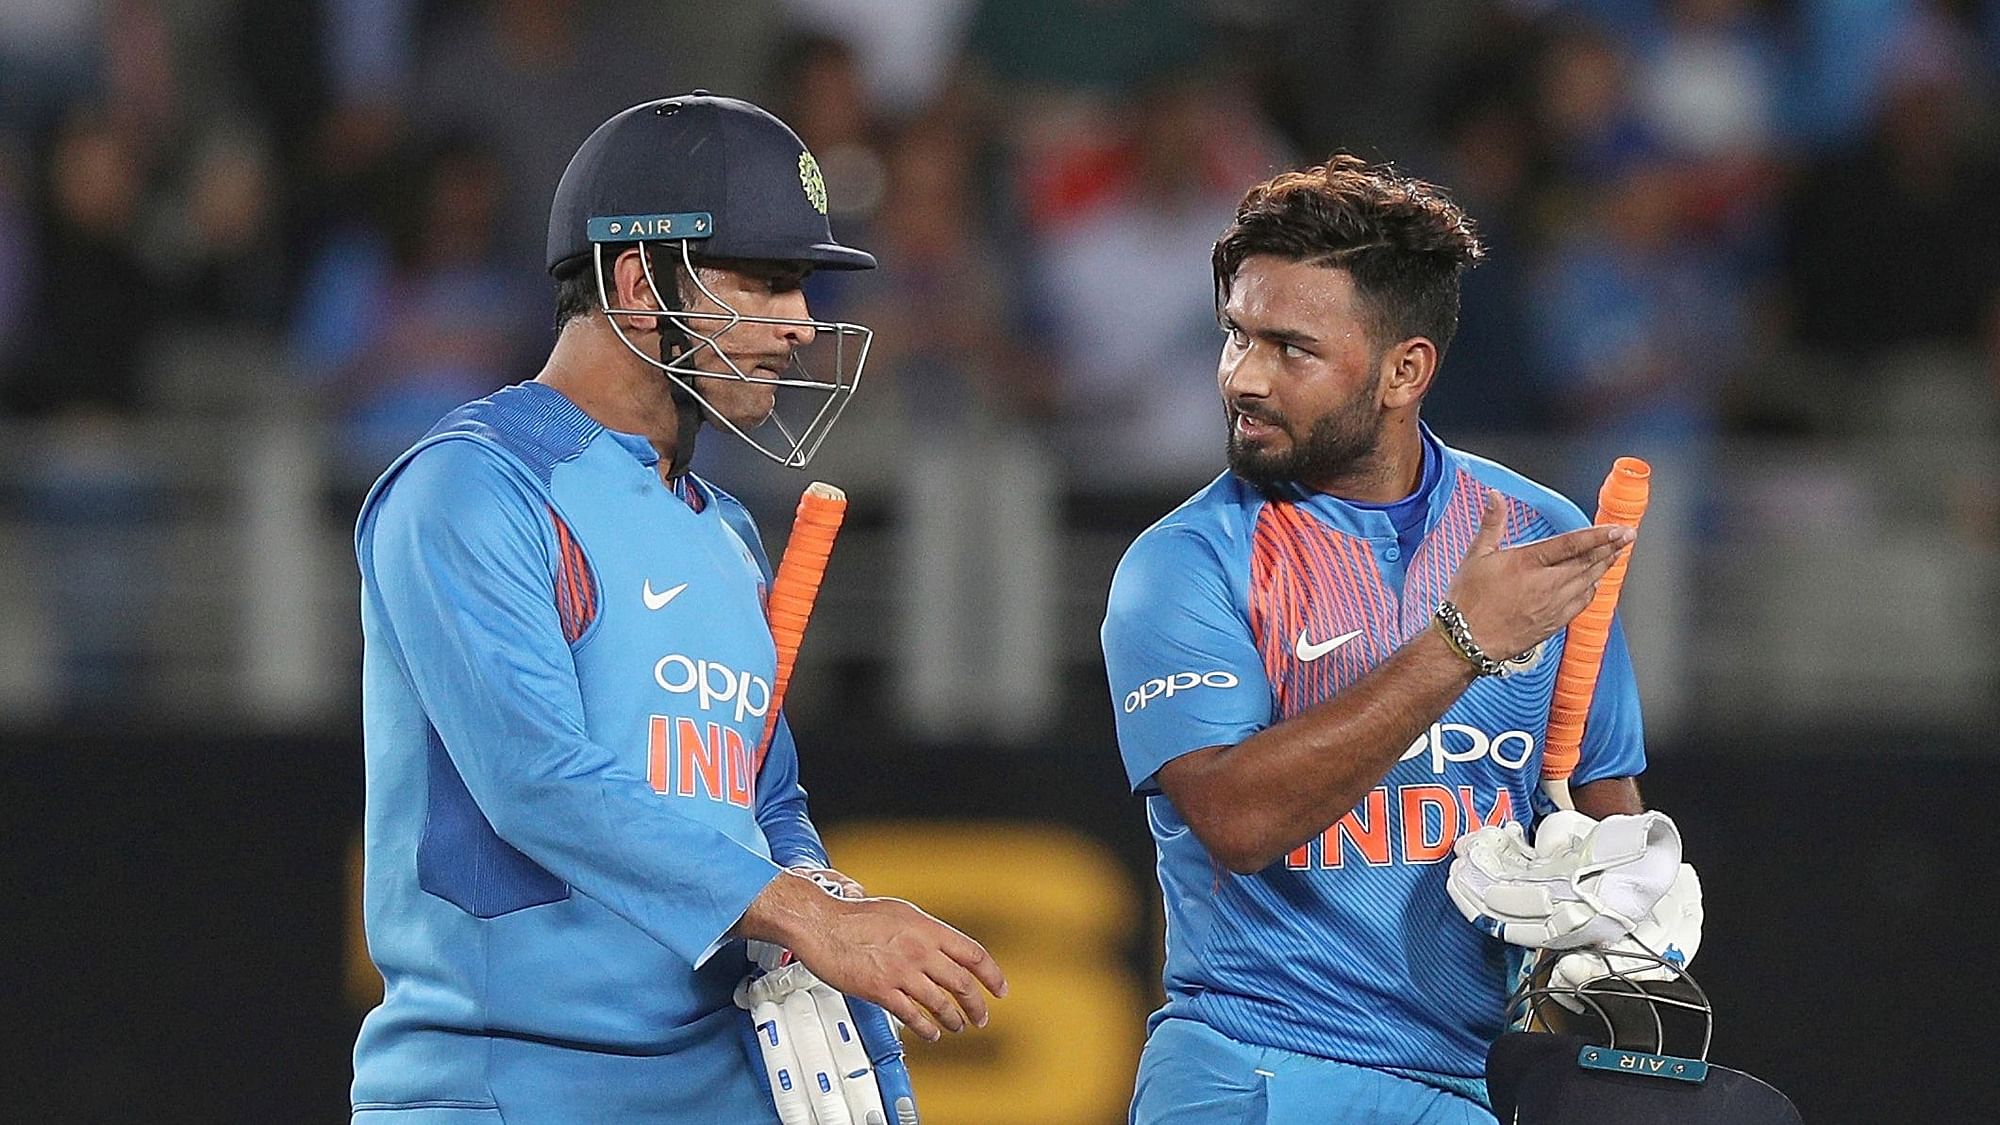 Rishabh Pant has been picked as the wicket-keeper that will become India’s number 1 choice wicket-keeper in all formats.